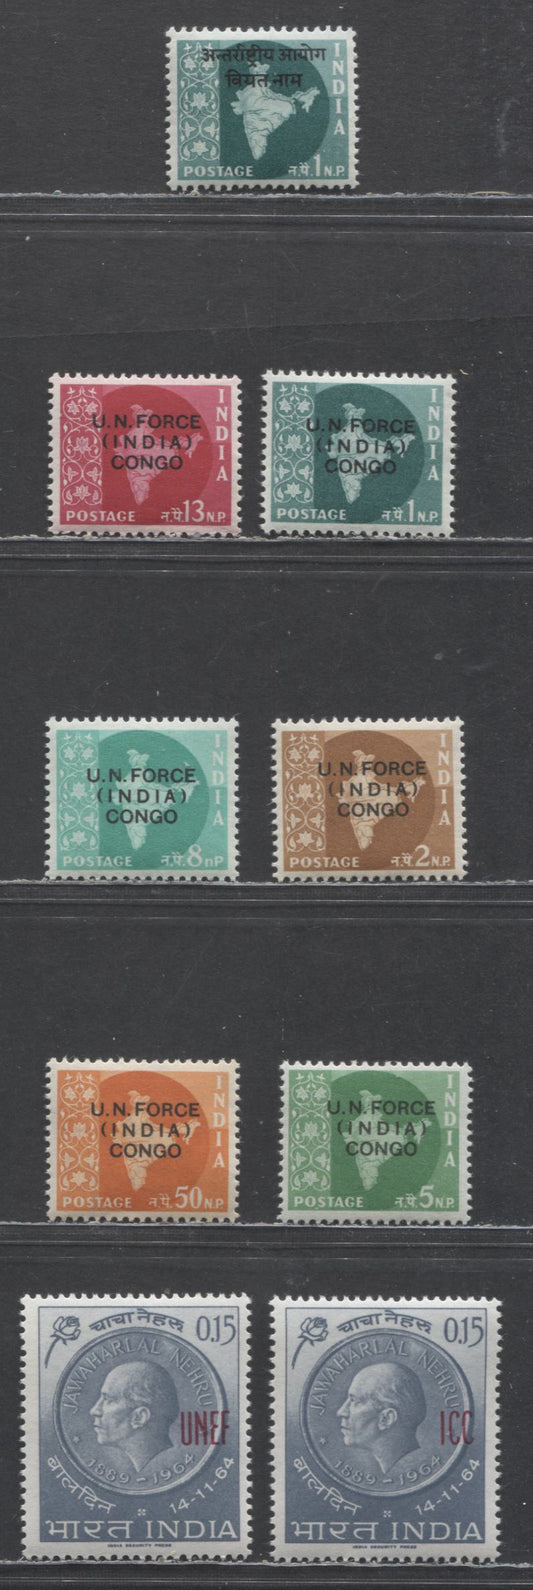 Lot 96 India SC#M56/M62 1961-1965 Indian UN Forces In Congo, Gaza & International Commission In Indochina - Laos & Vietnam Issues, 9 VFOG Singles, Click on Listing to See ALL Pictures, Estimated Value $8